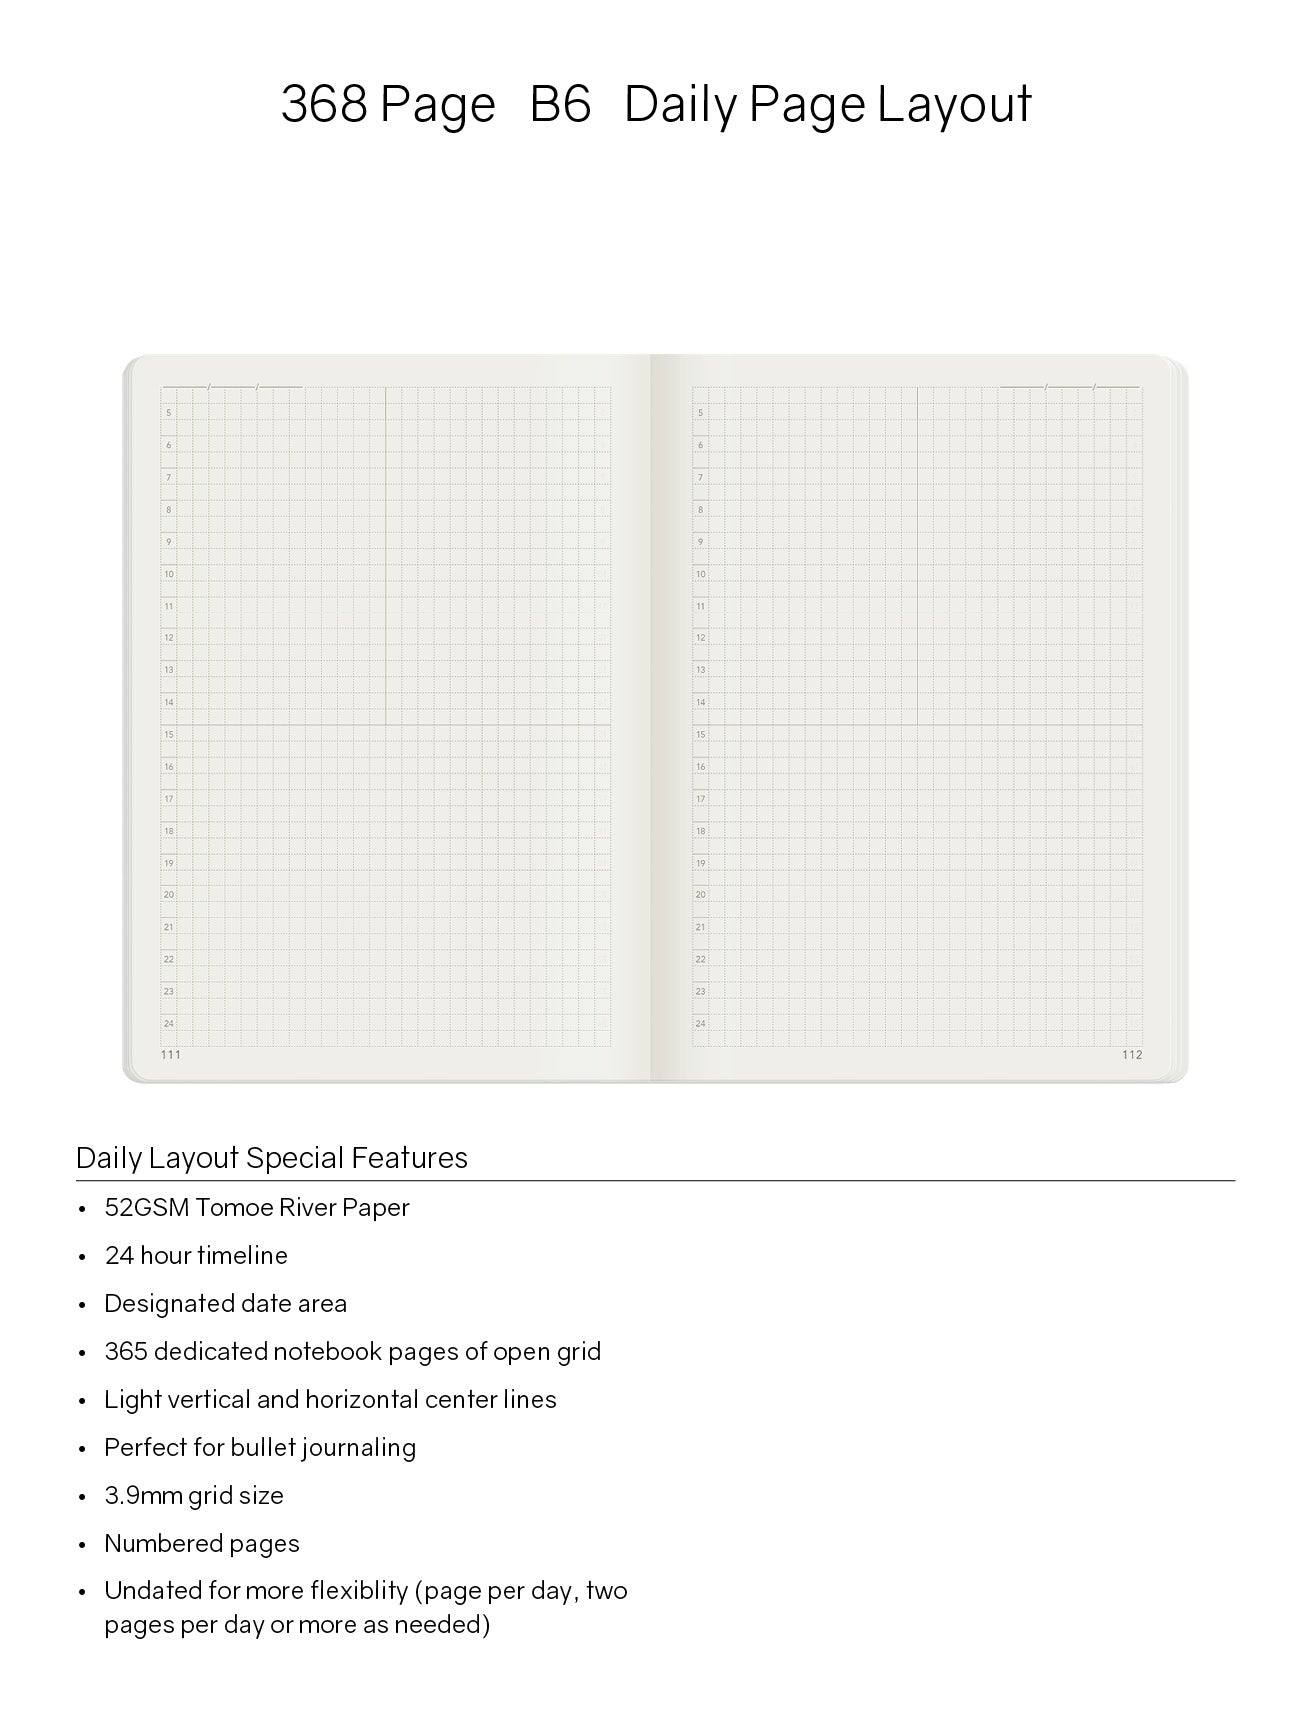 B6 Notebook (368 pages)